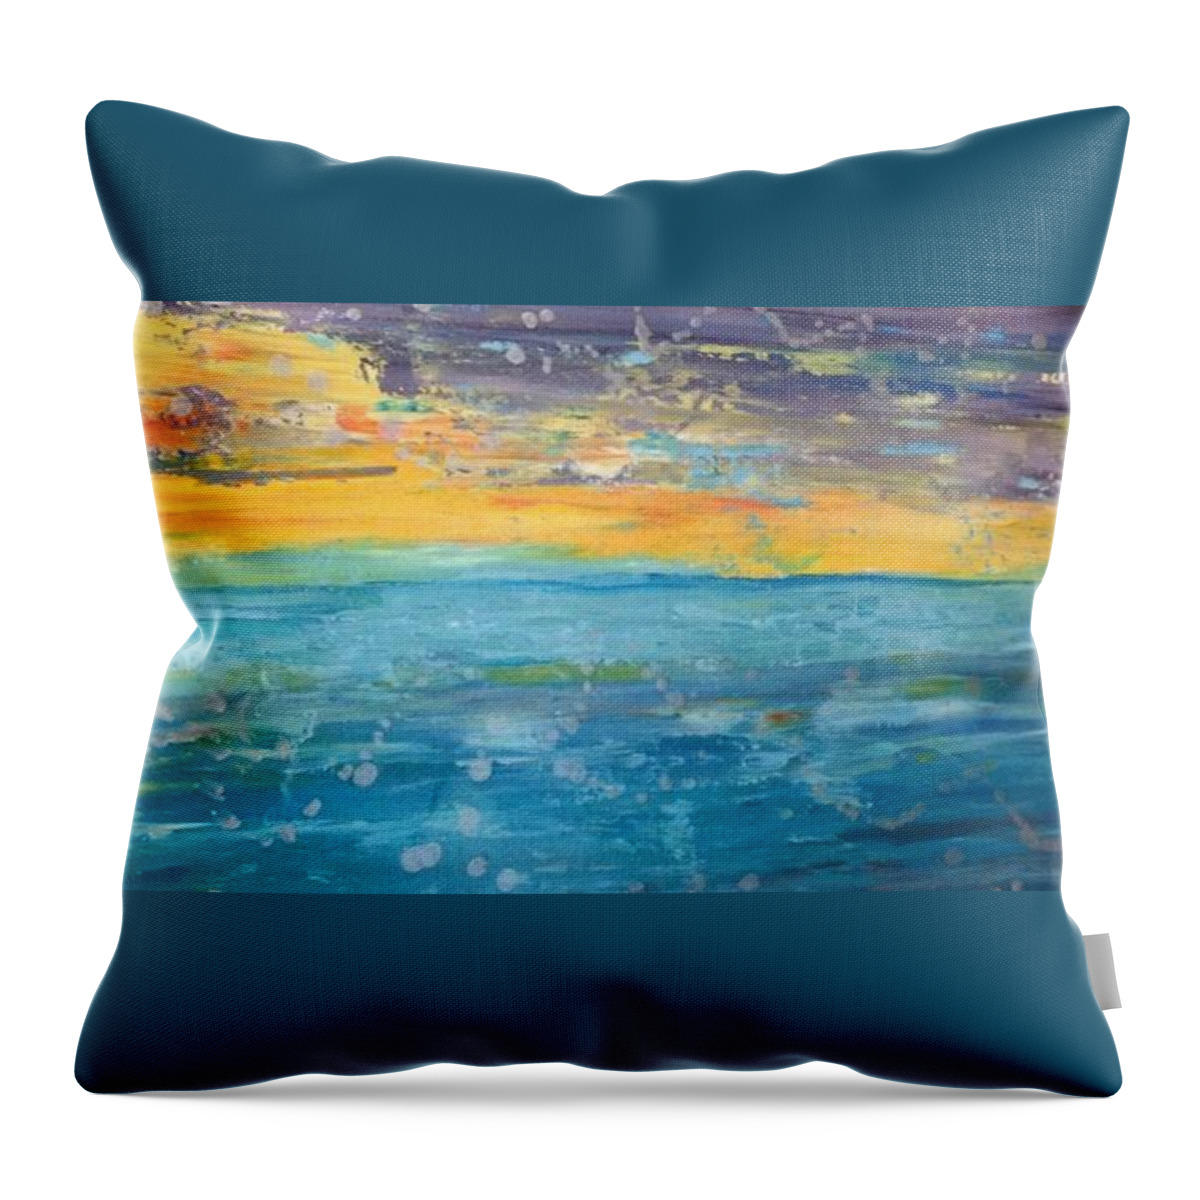  Throw Pillow featuring the painting Florida Sunset by MiMi Stirn